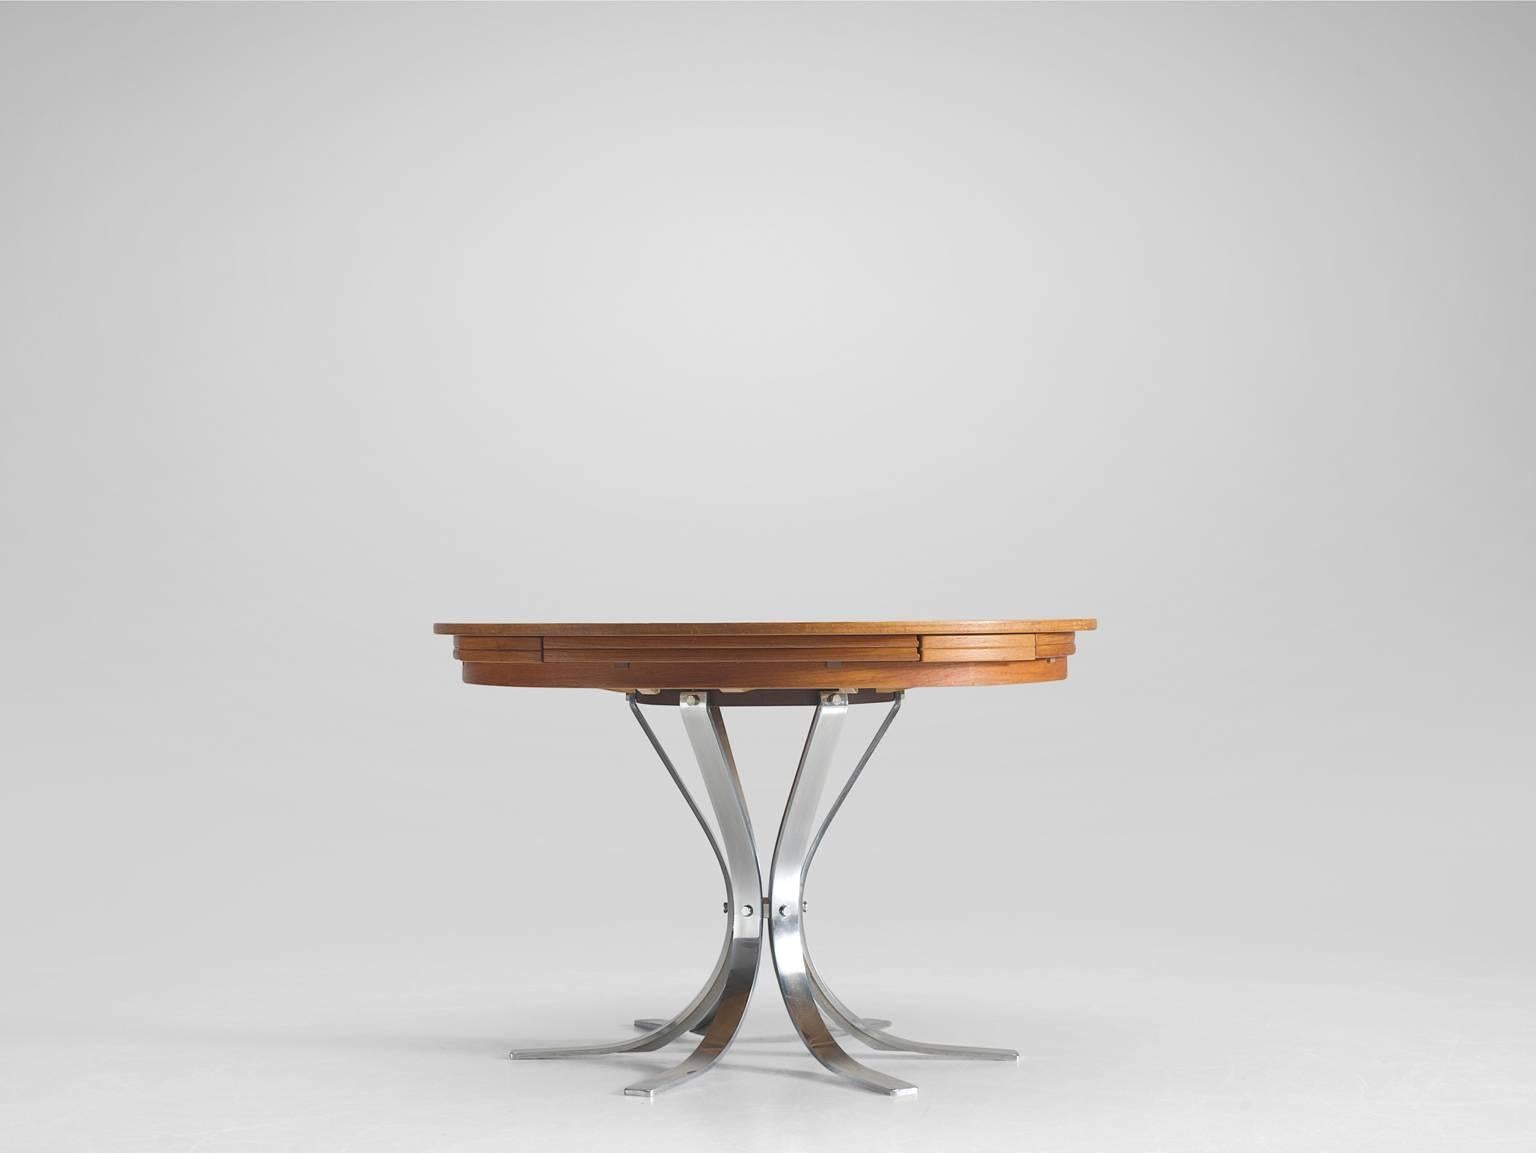 Round extend-able pedestal table, teak and steel, Dyrlund, Denmark, 1960s.

This circular, extendable table has a pedestal chrome base in a six star model and is finished with a teak top. The top has the ability to extend in diameter. Four fold-able